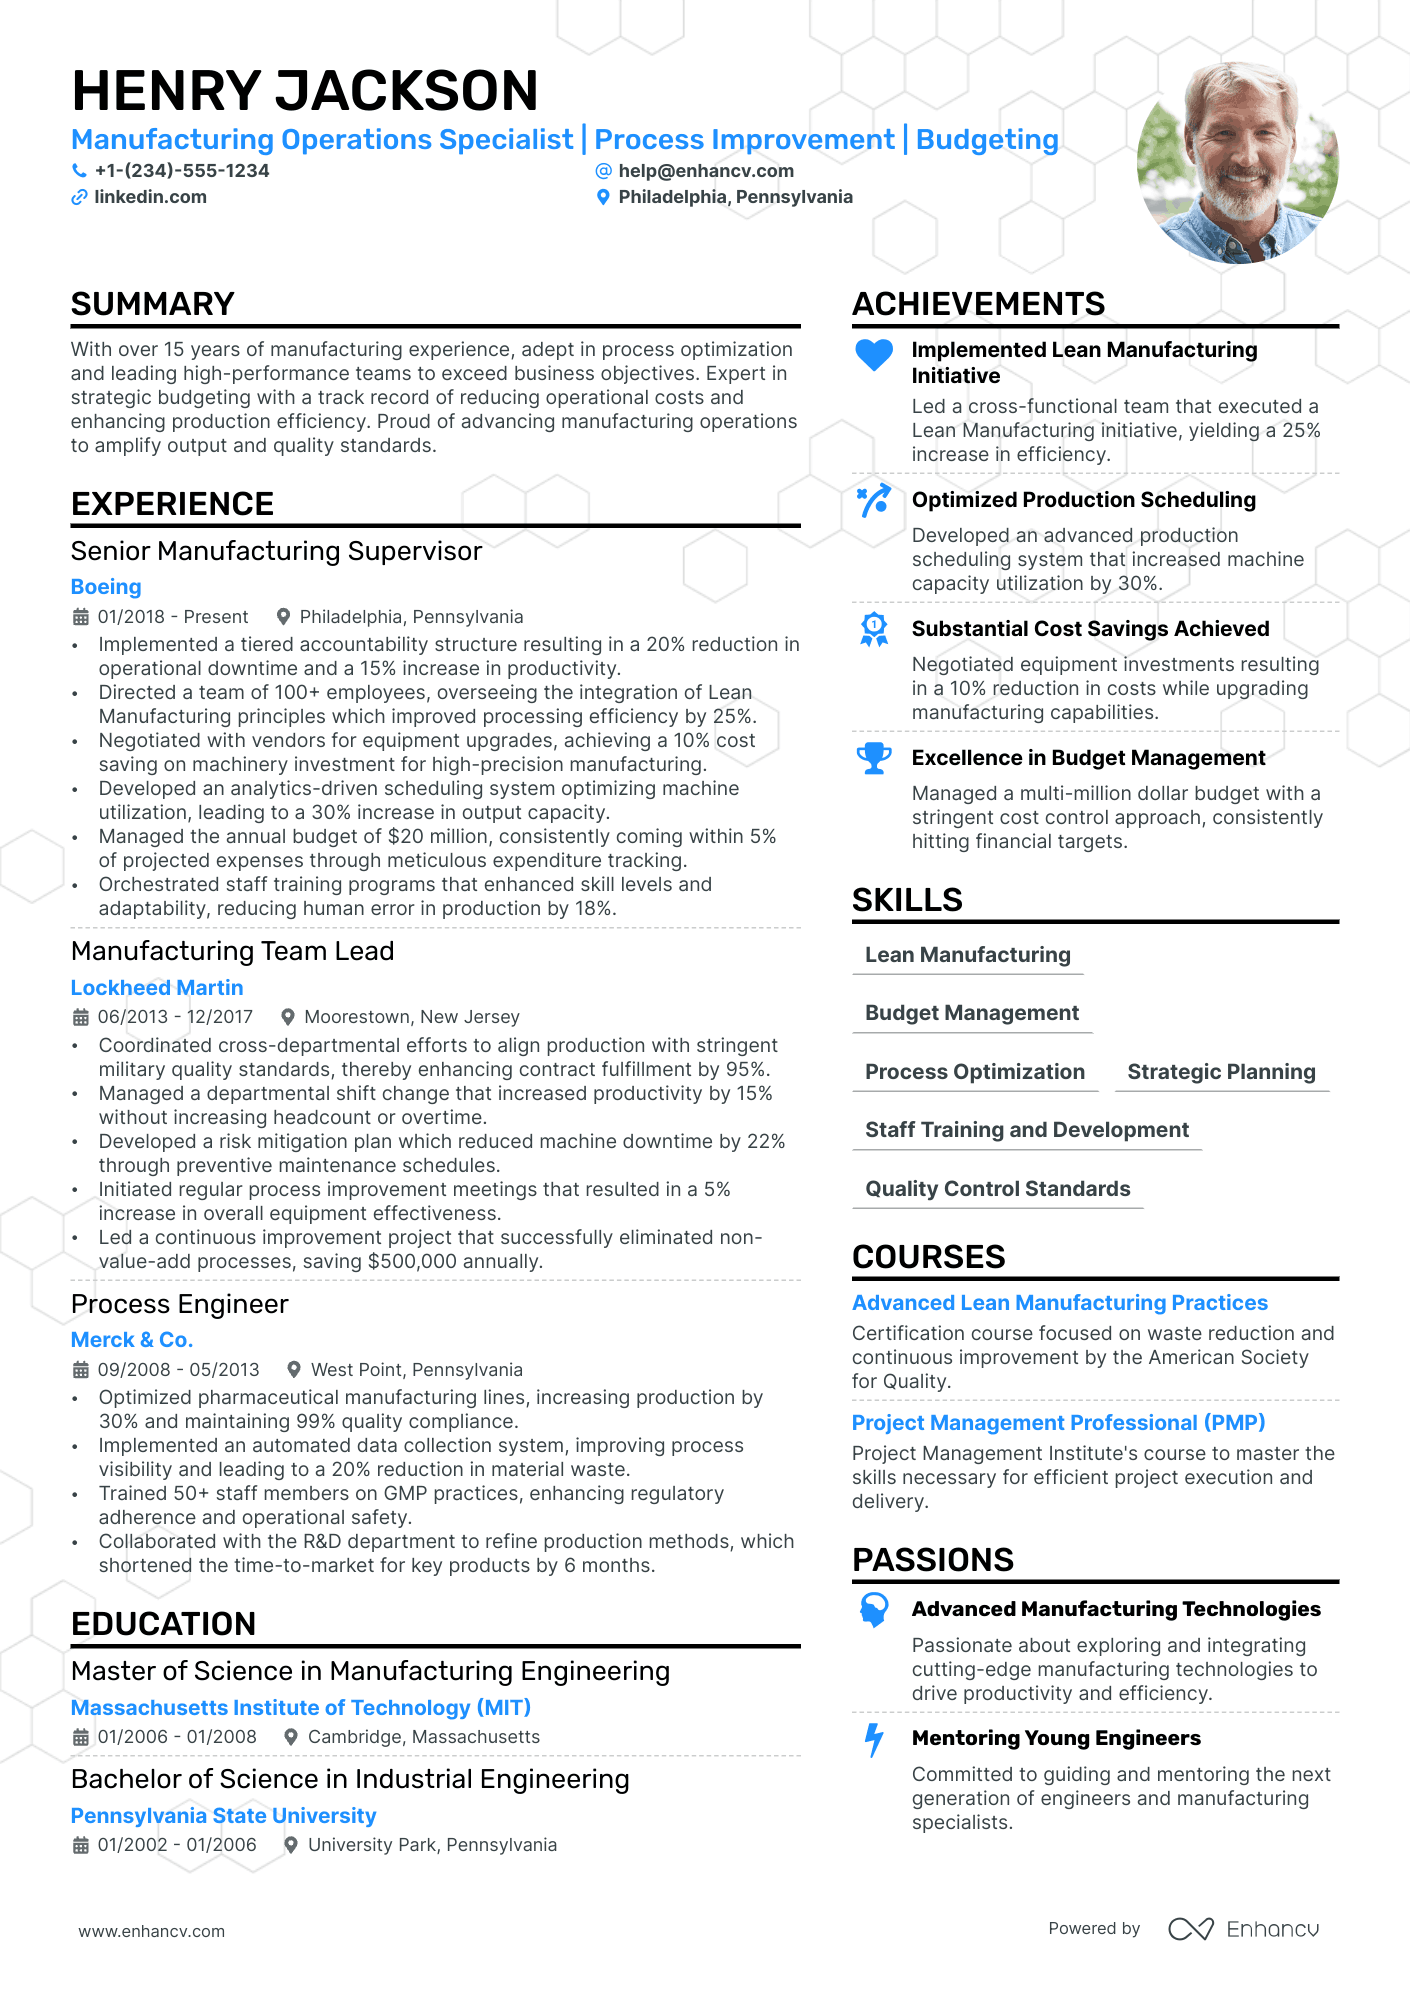 Manufacturing Manager resume example